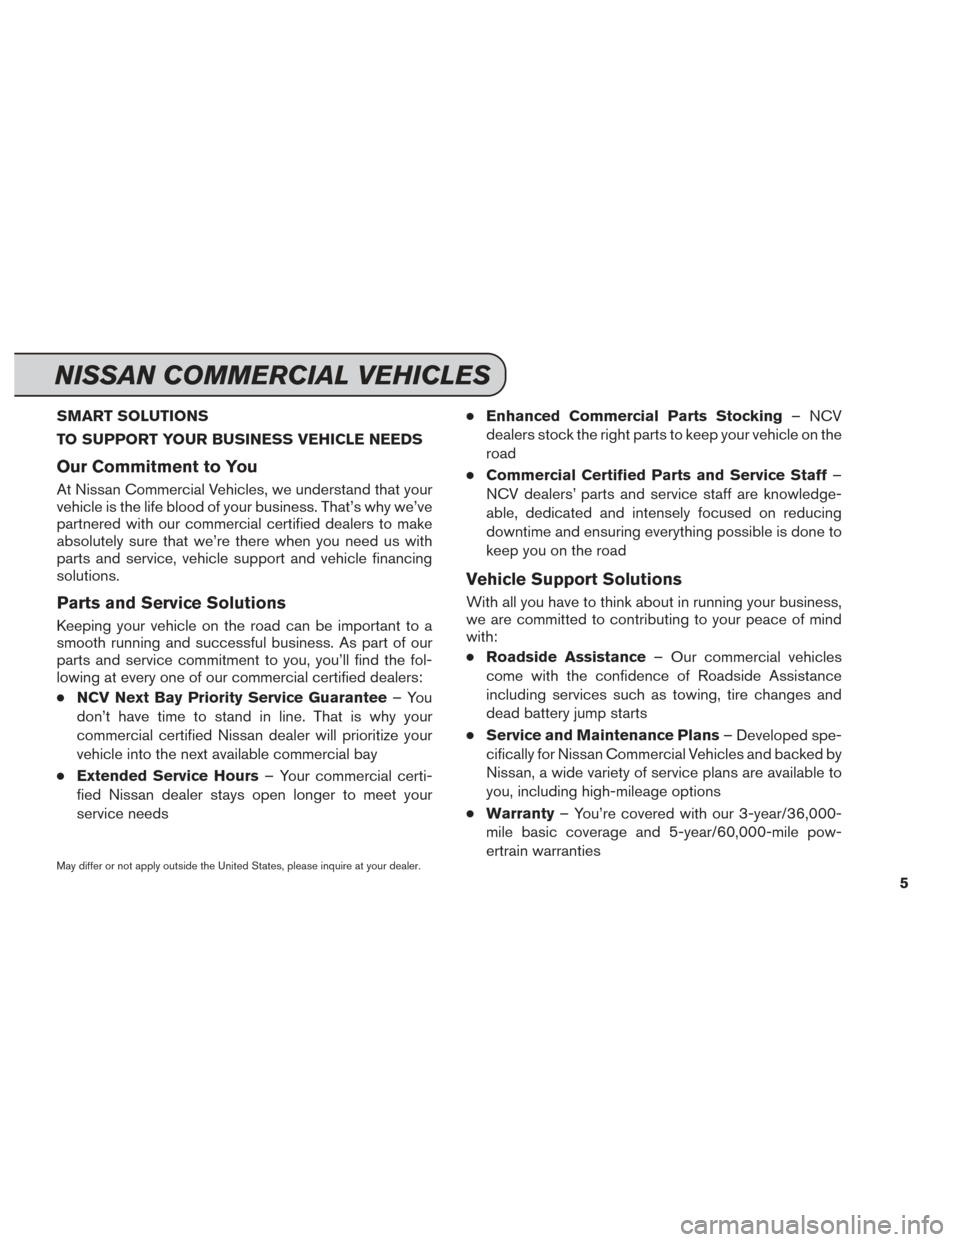 NISSAN MAXIMA 2014 A35 / 7.G Service And Maintenance Guide SMART SOLUTIONS
TO SUPPORT YOUR BUSINESS VEHICLE NEEDS
Our Commitment to You
At Nissan Commercial Vehicles, we understand that your
vehicle is the life blood of your business. That’s why we’ve
par